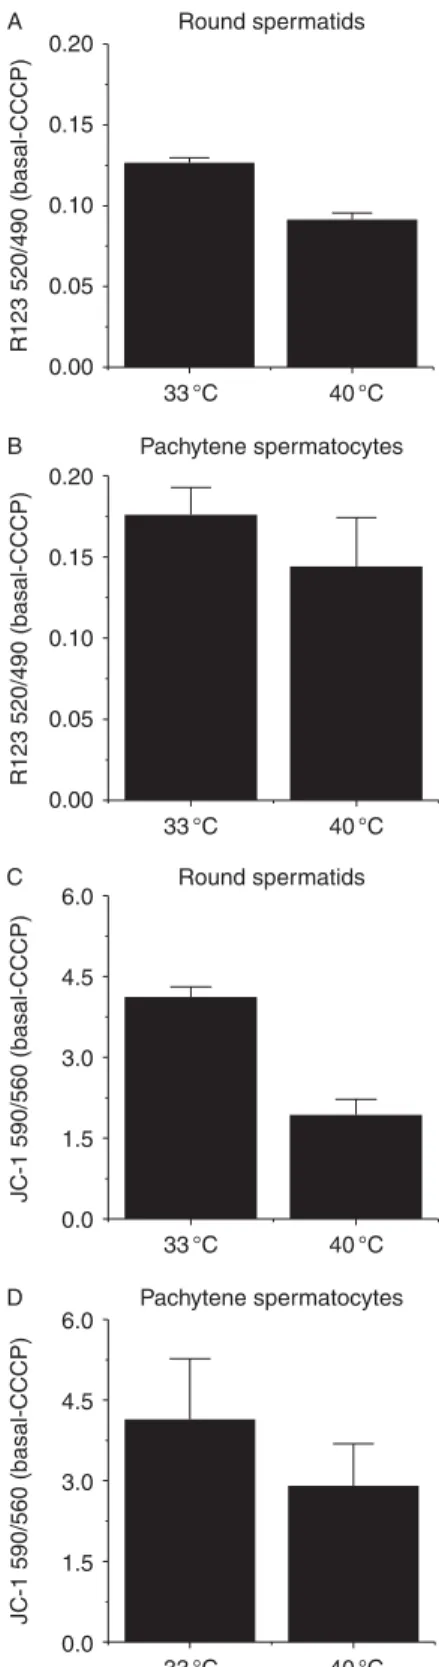 Figure 6 shows the changes in the rhodamine 123 (R123) fluorescence ratio (an estimation of  mito-chondrial membrane potential) induced by heat stress (40 8C) in round spermatids and pachytene spermatocyte mitochondria